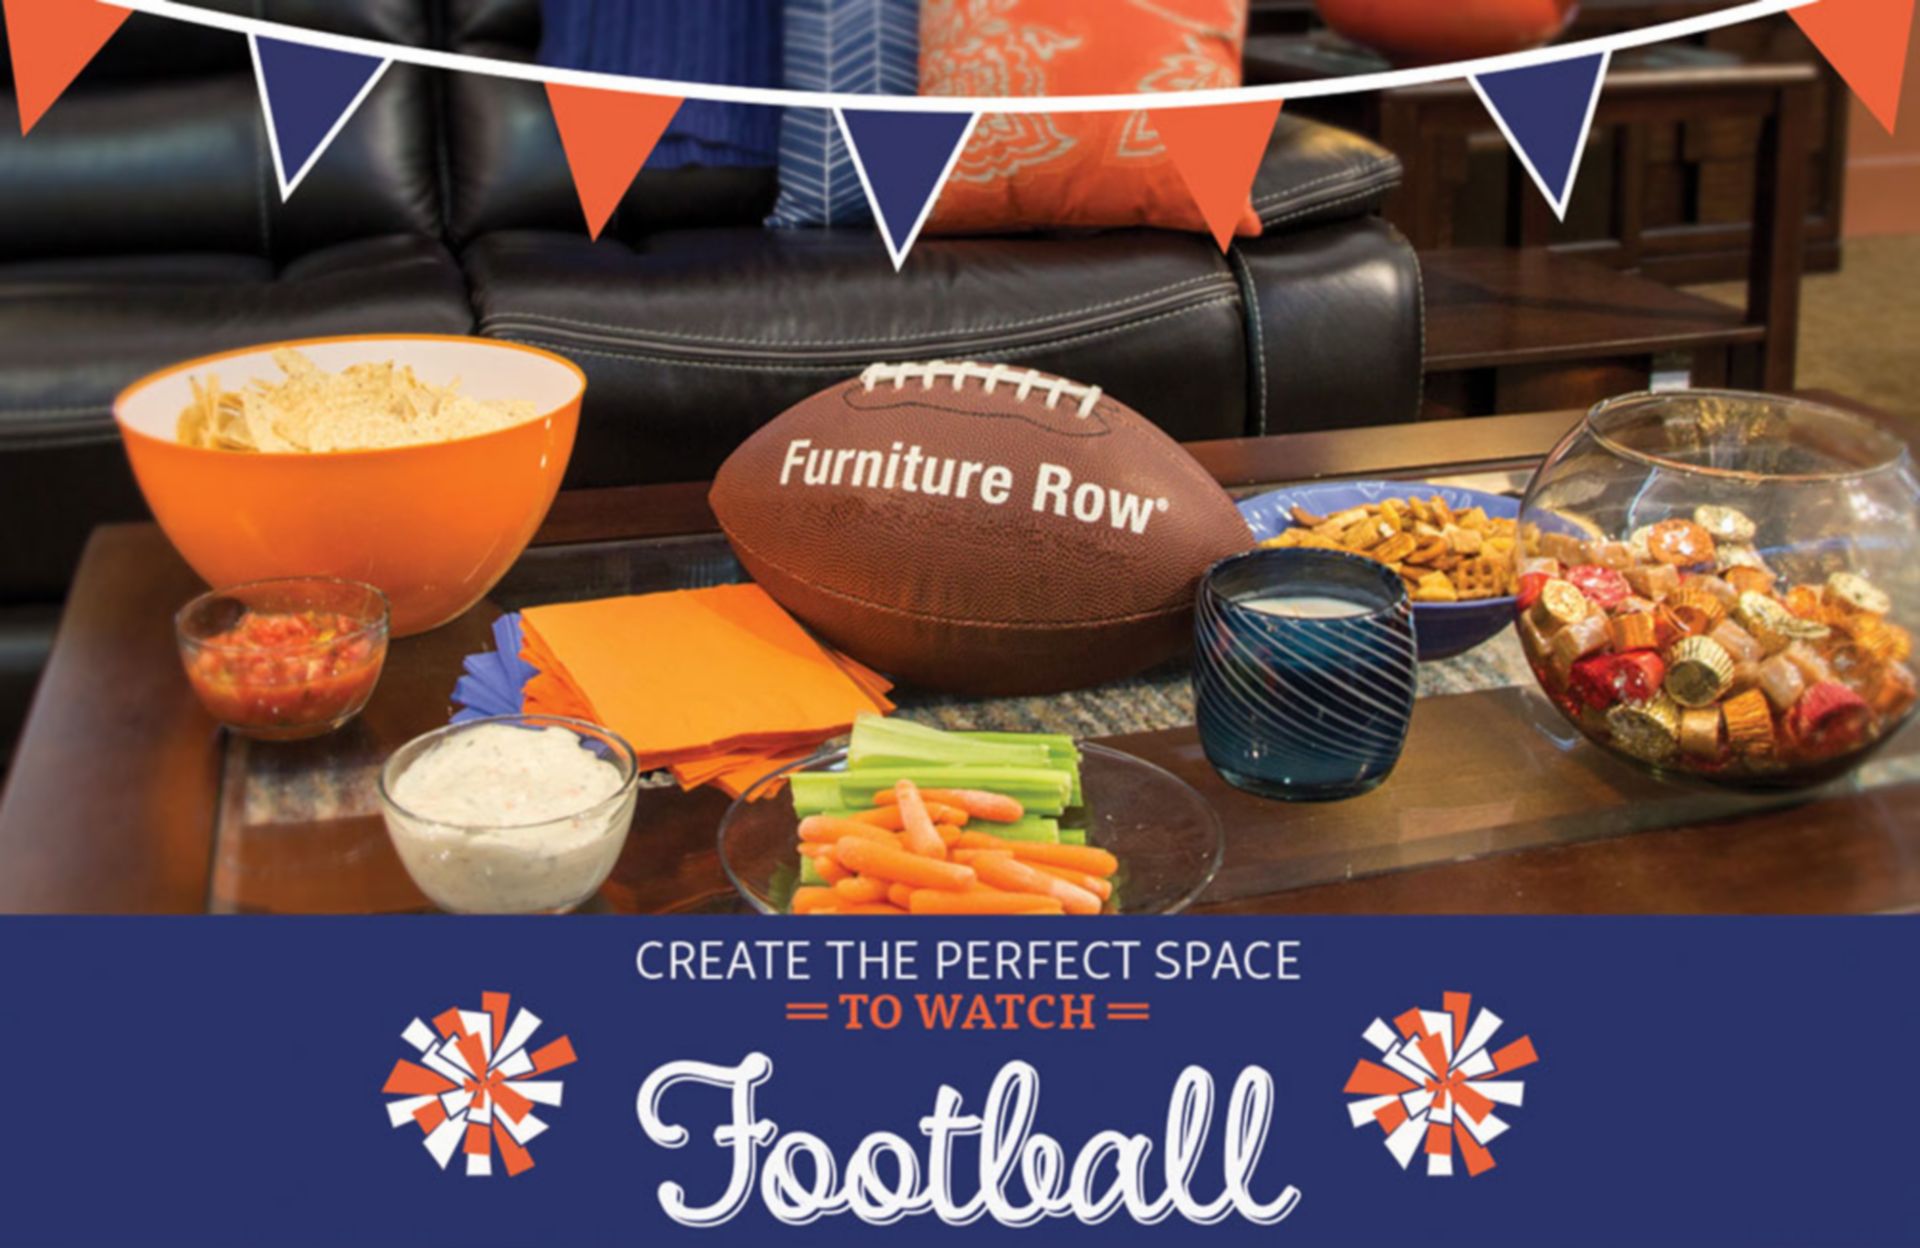 Create the Perfect Space to watch Football. Coffee table with snack bar. 